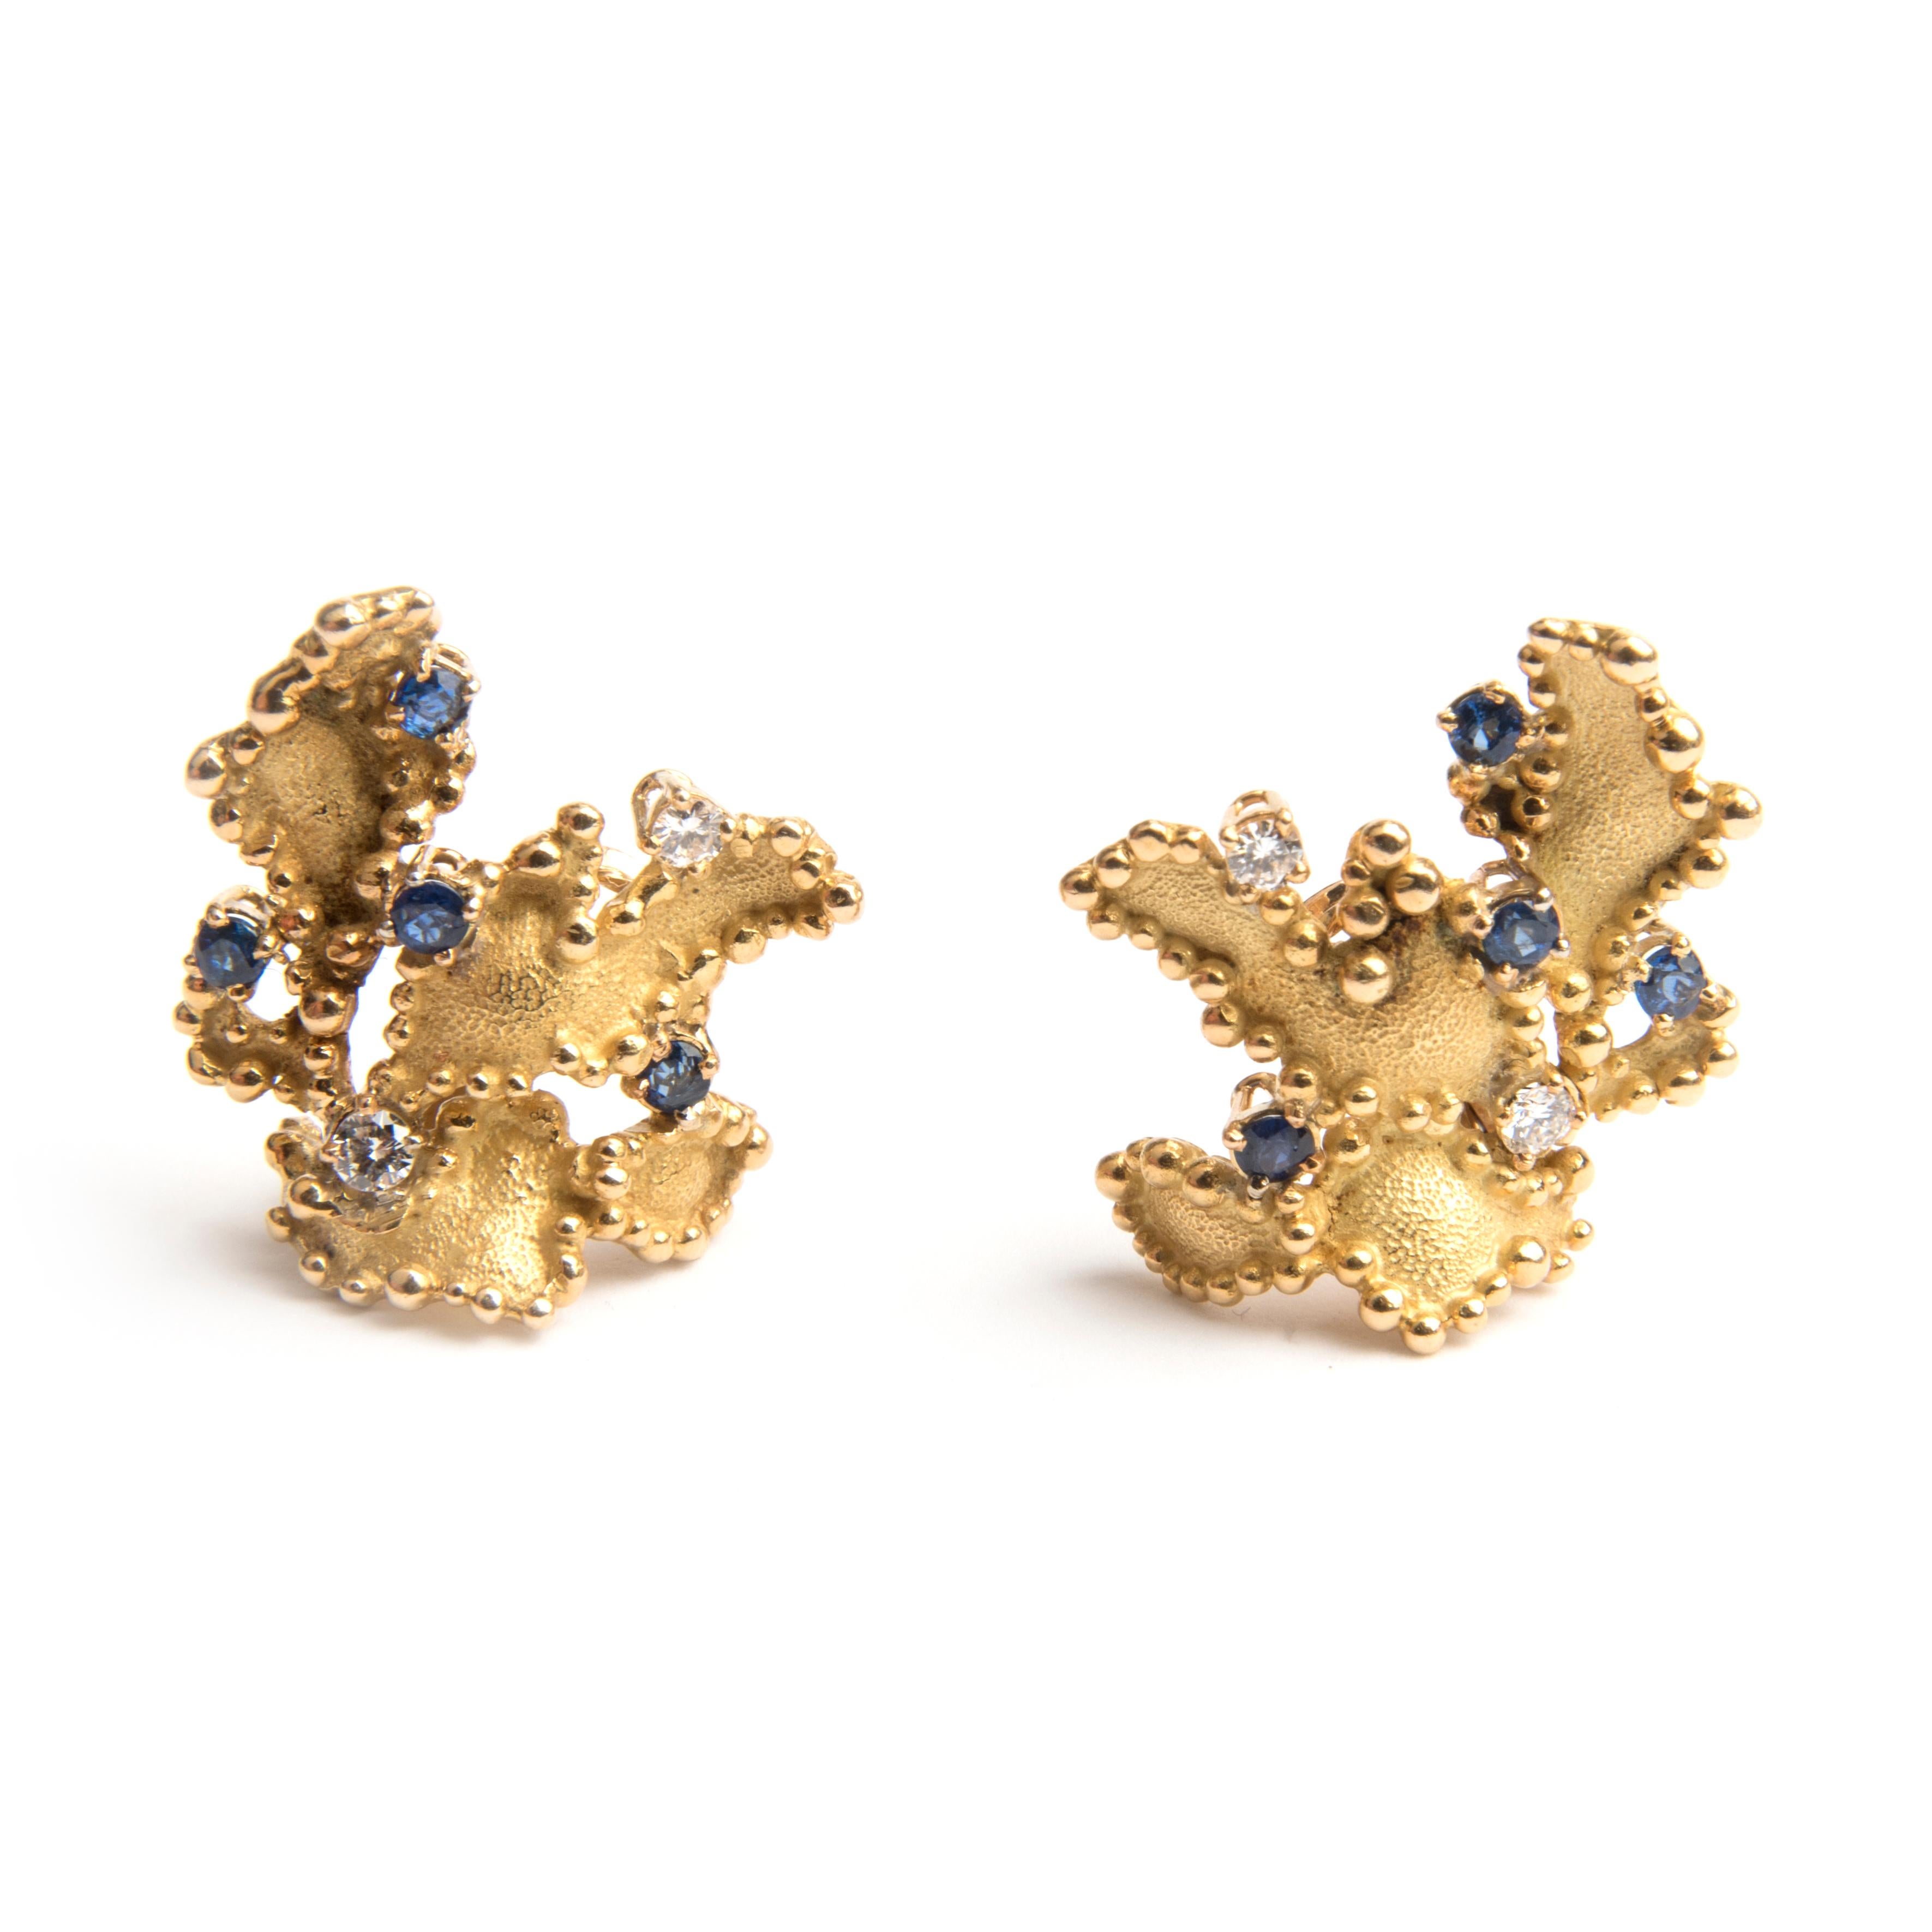 Boucheron clip earrings, designed as three 18k yellow leaves, set with 4 blue sapphires and two diamonds each.
Signed Boucheron Paris, French hallmarks and numbered 37211 
Circa 1970
In original box